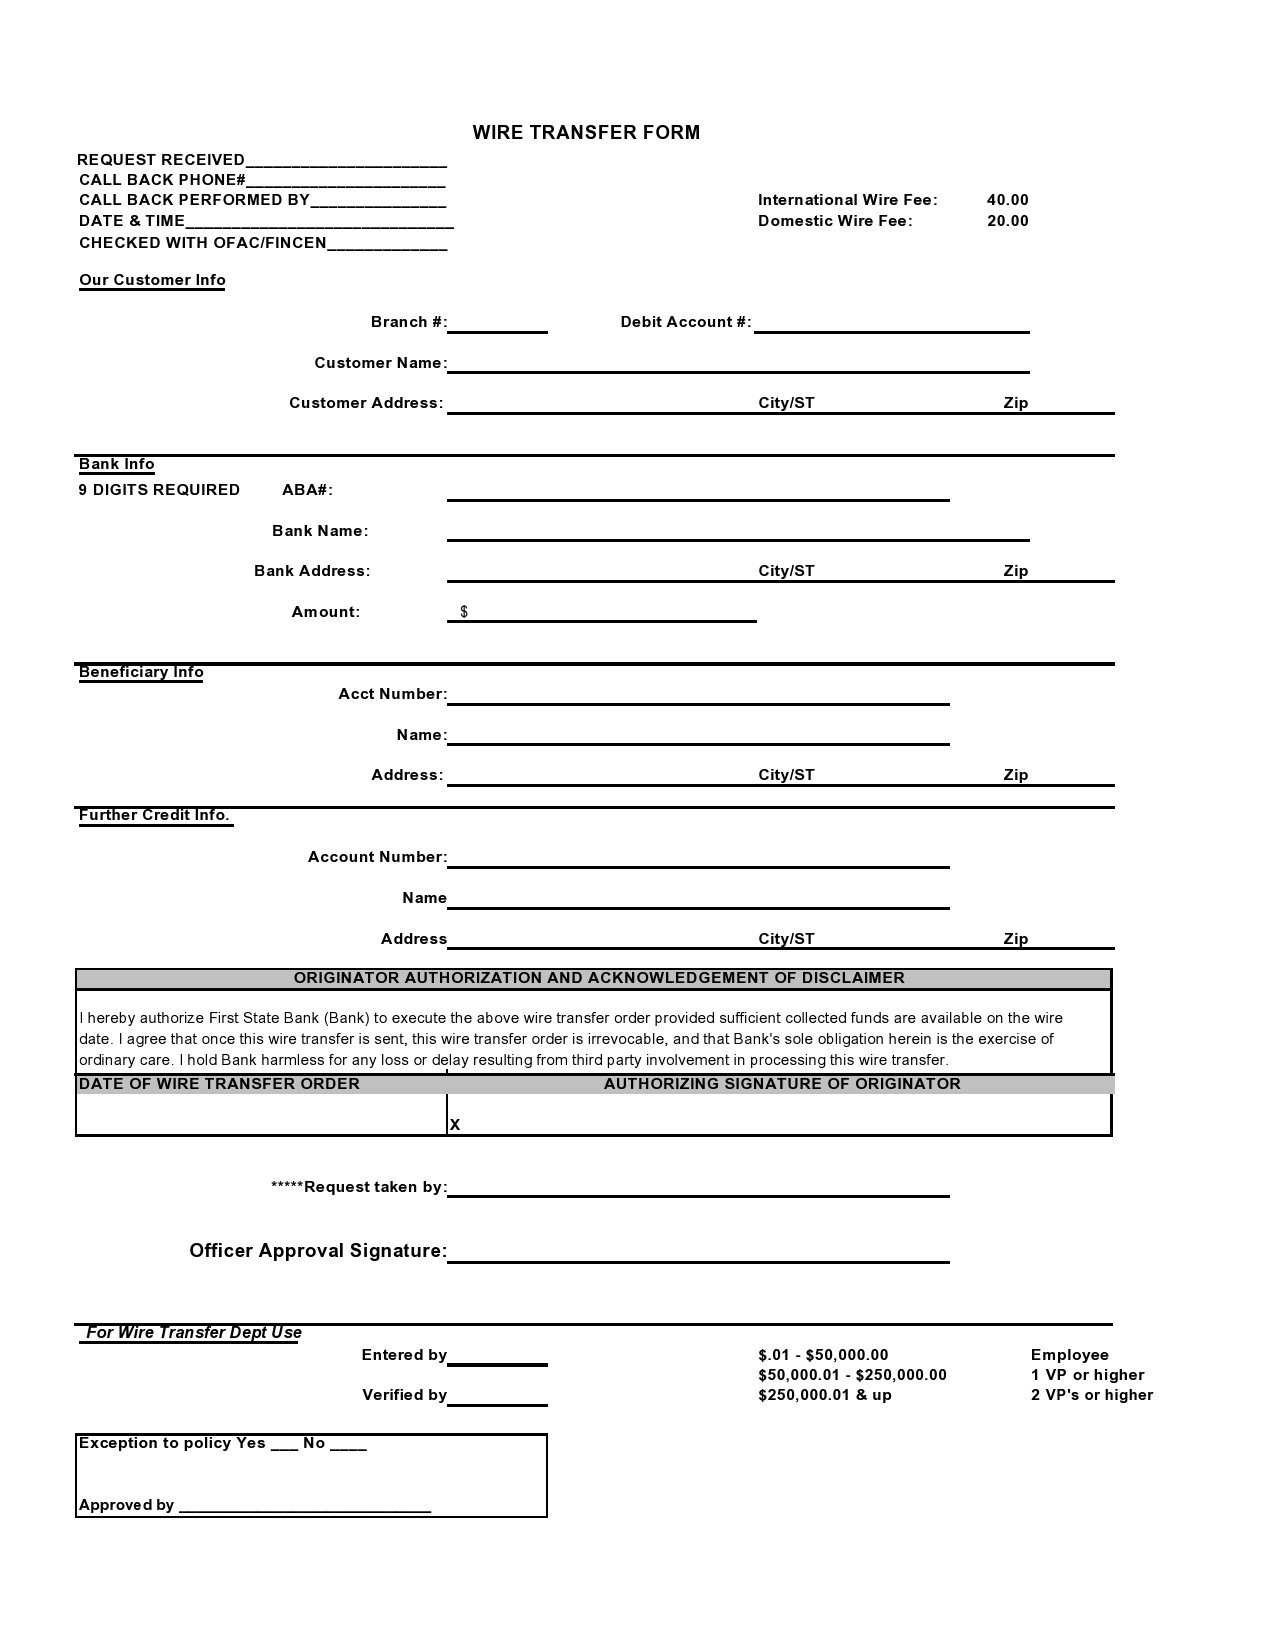 Free wire transfer form 20